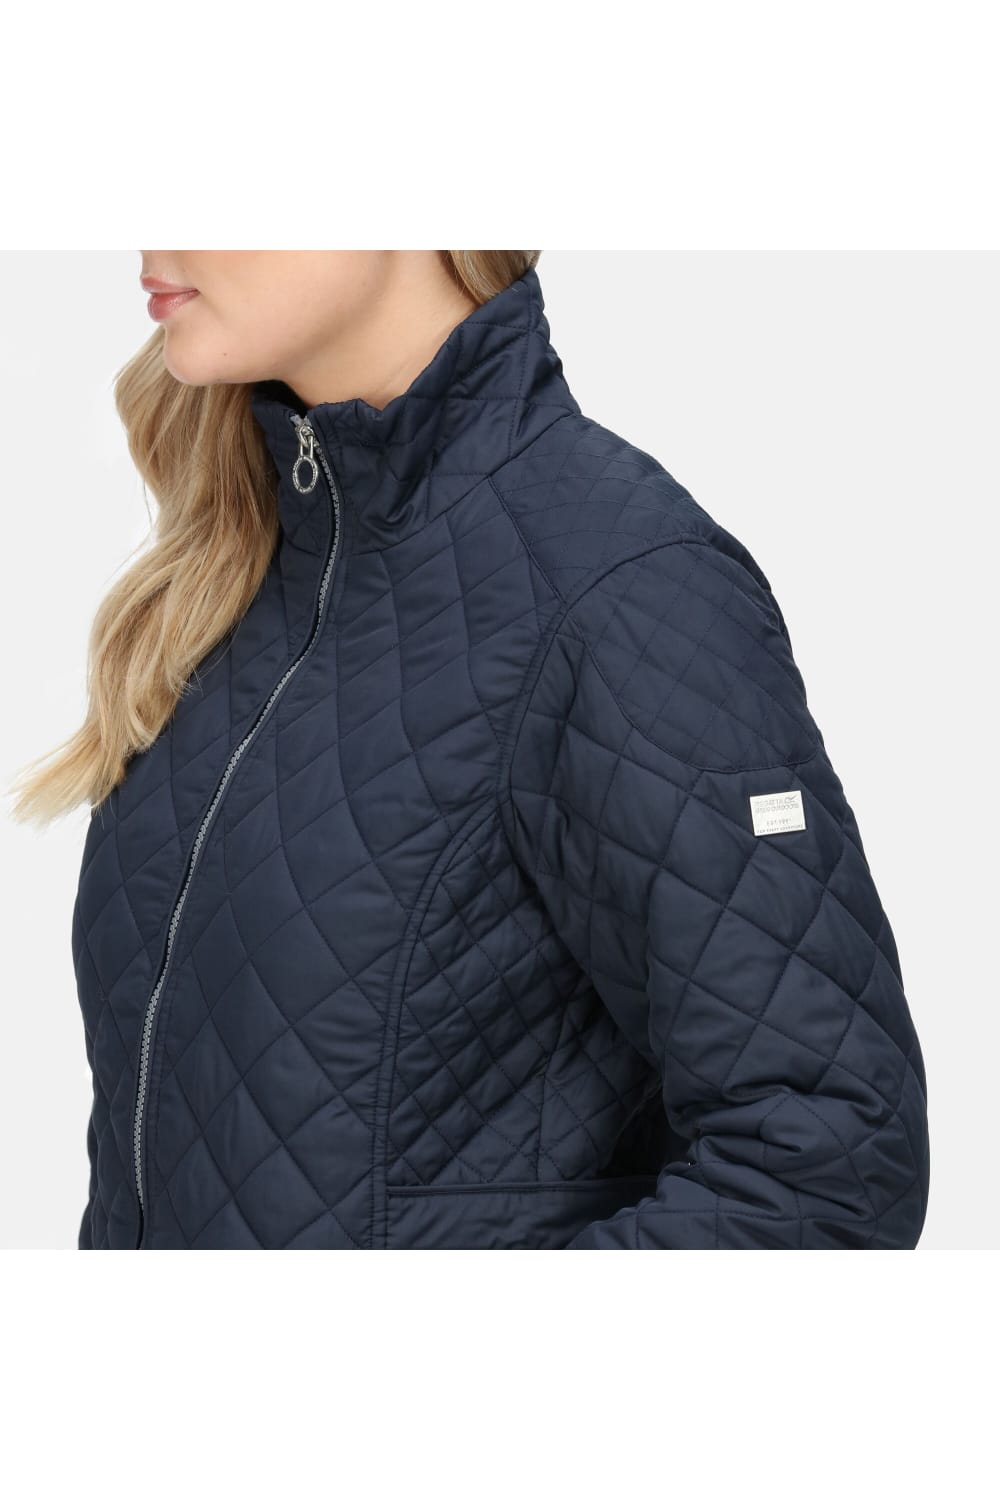 Regatta Womens/Ladies Charleigh Quilted Insulated Jacket